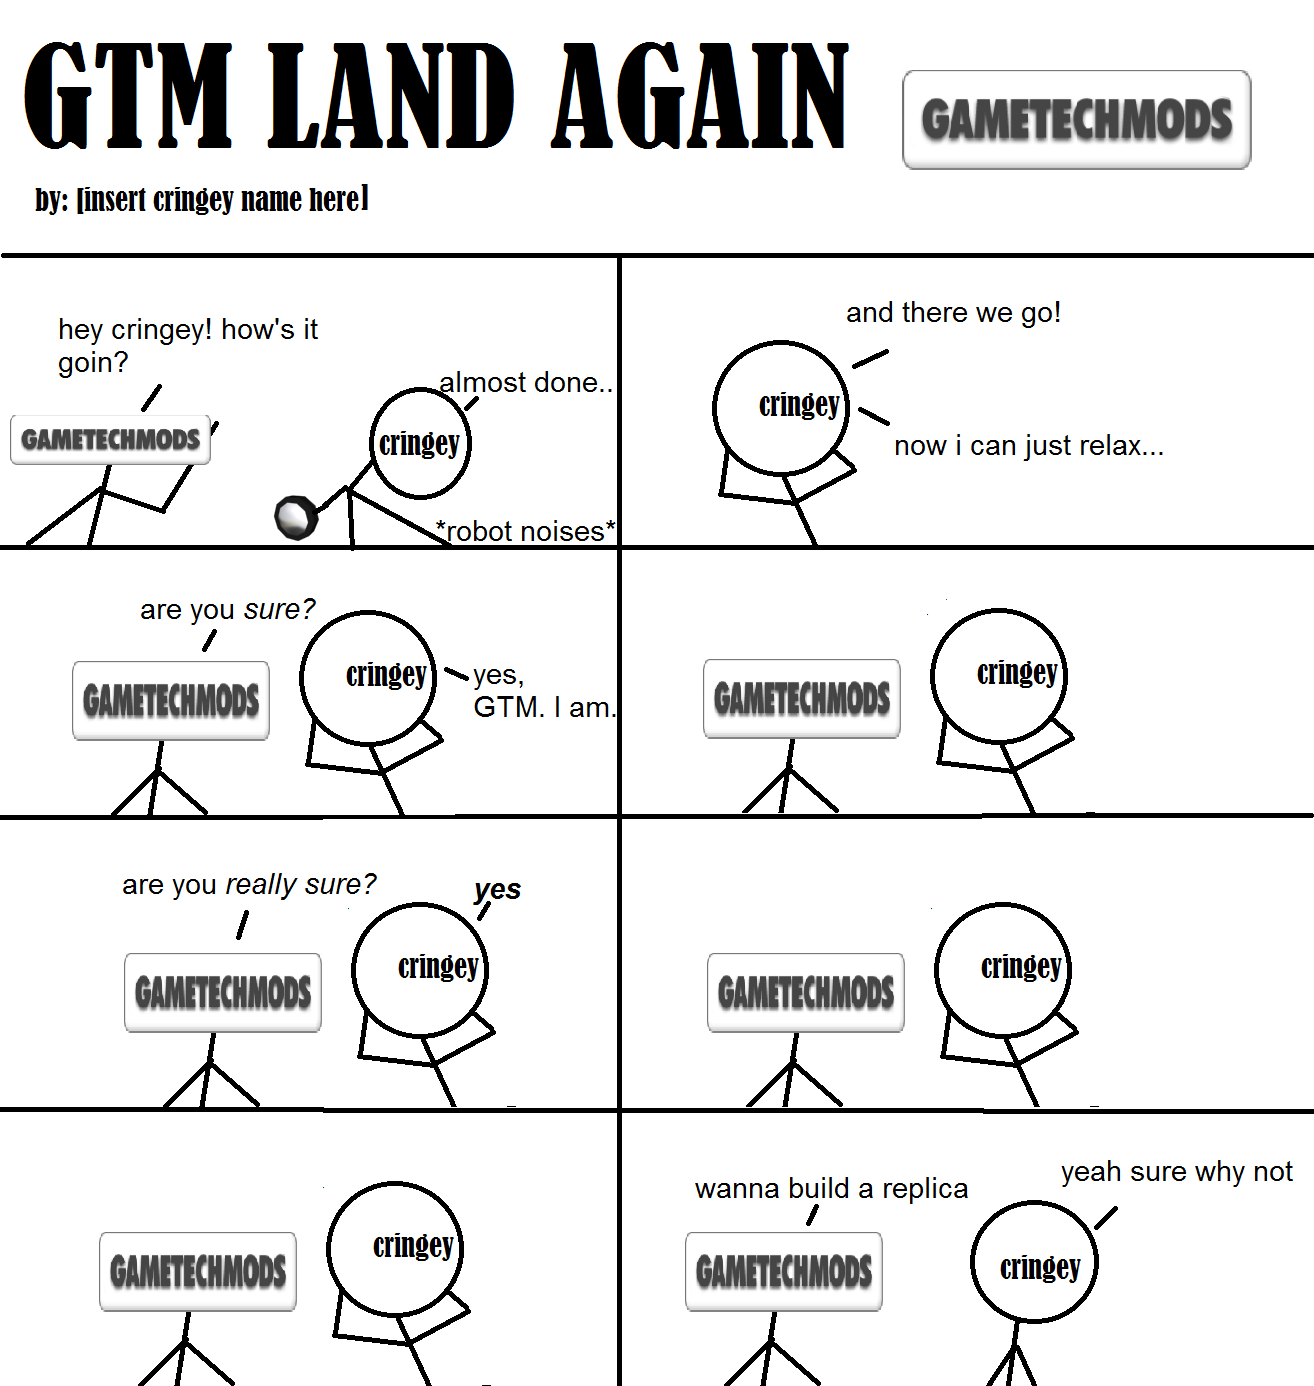 gtm2.png